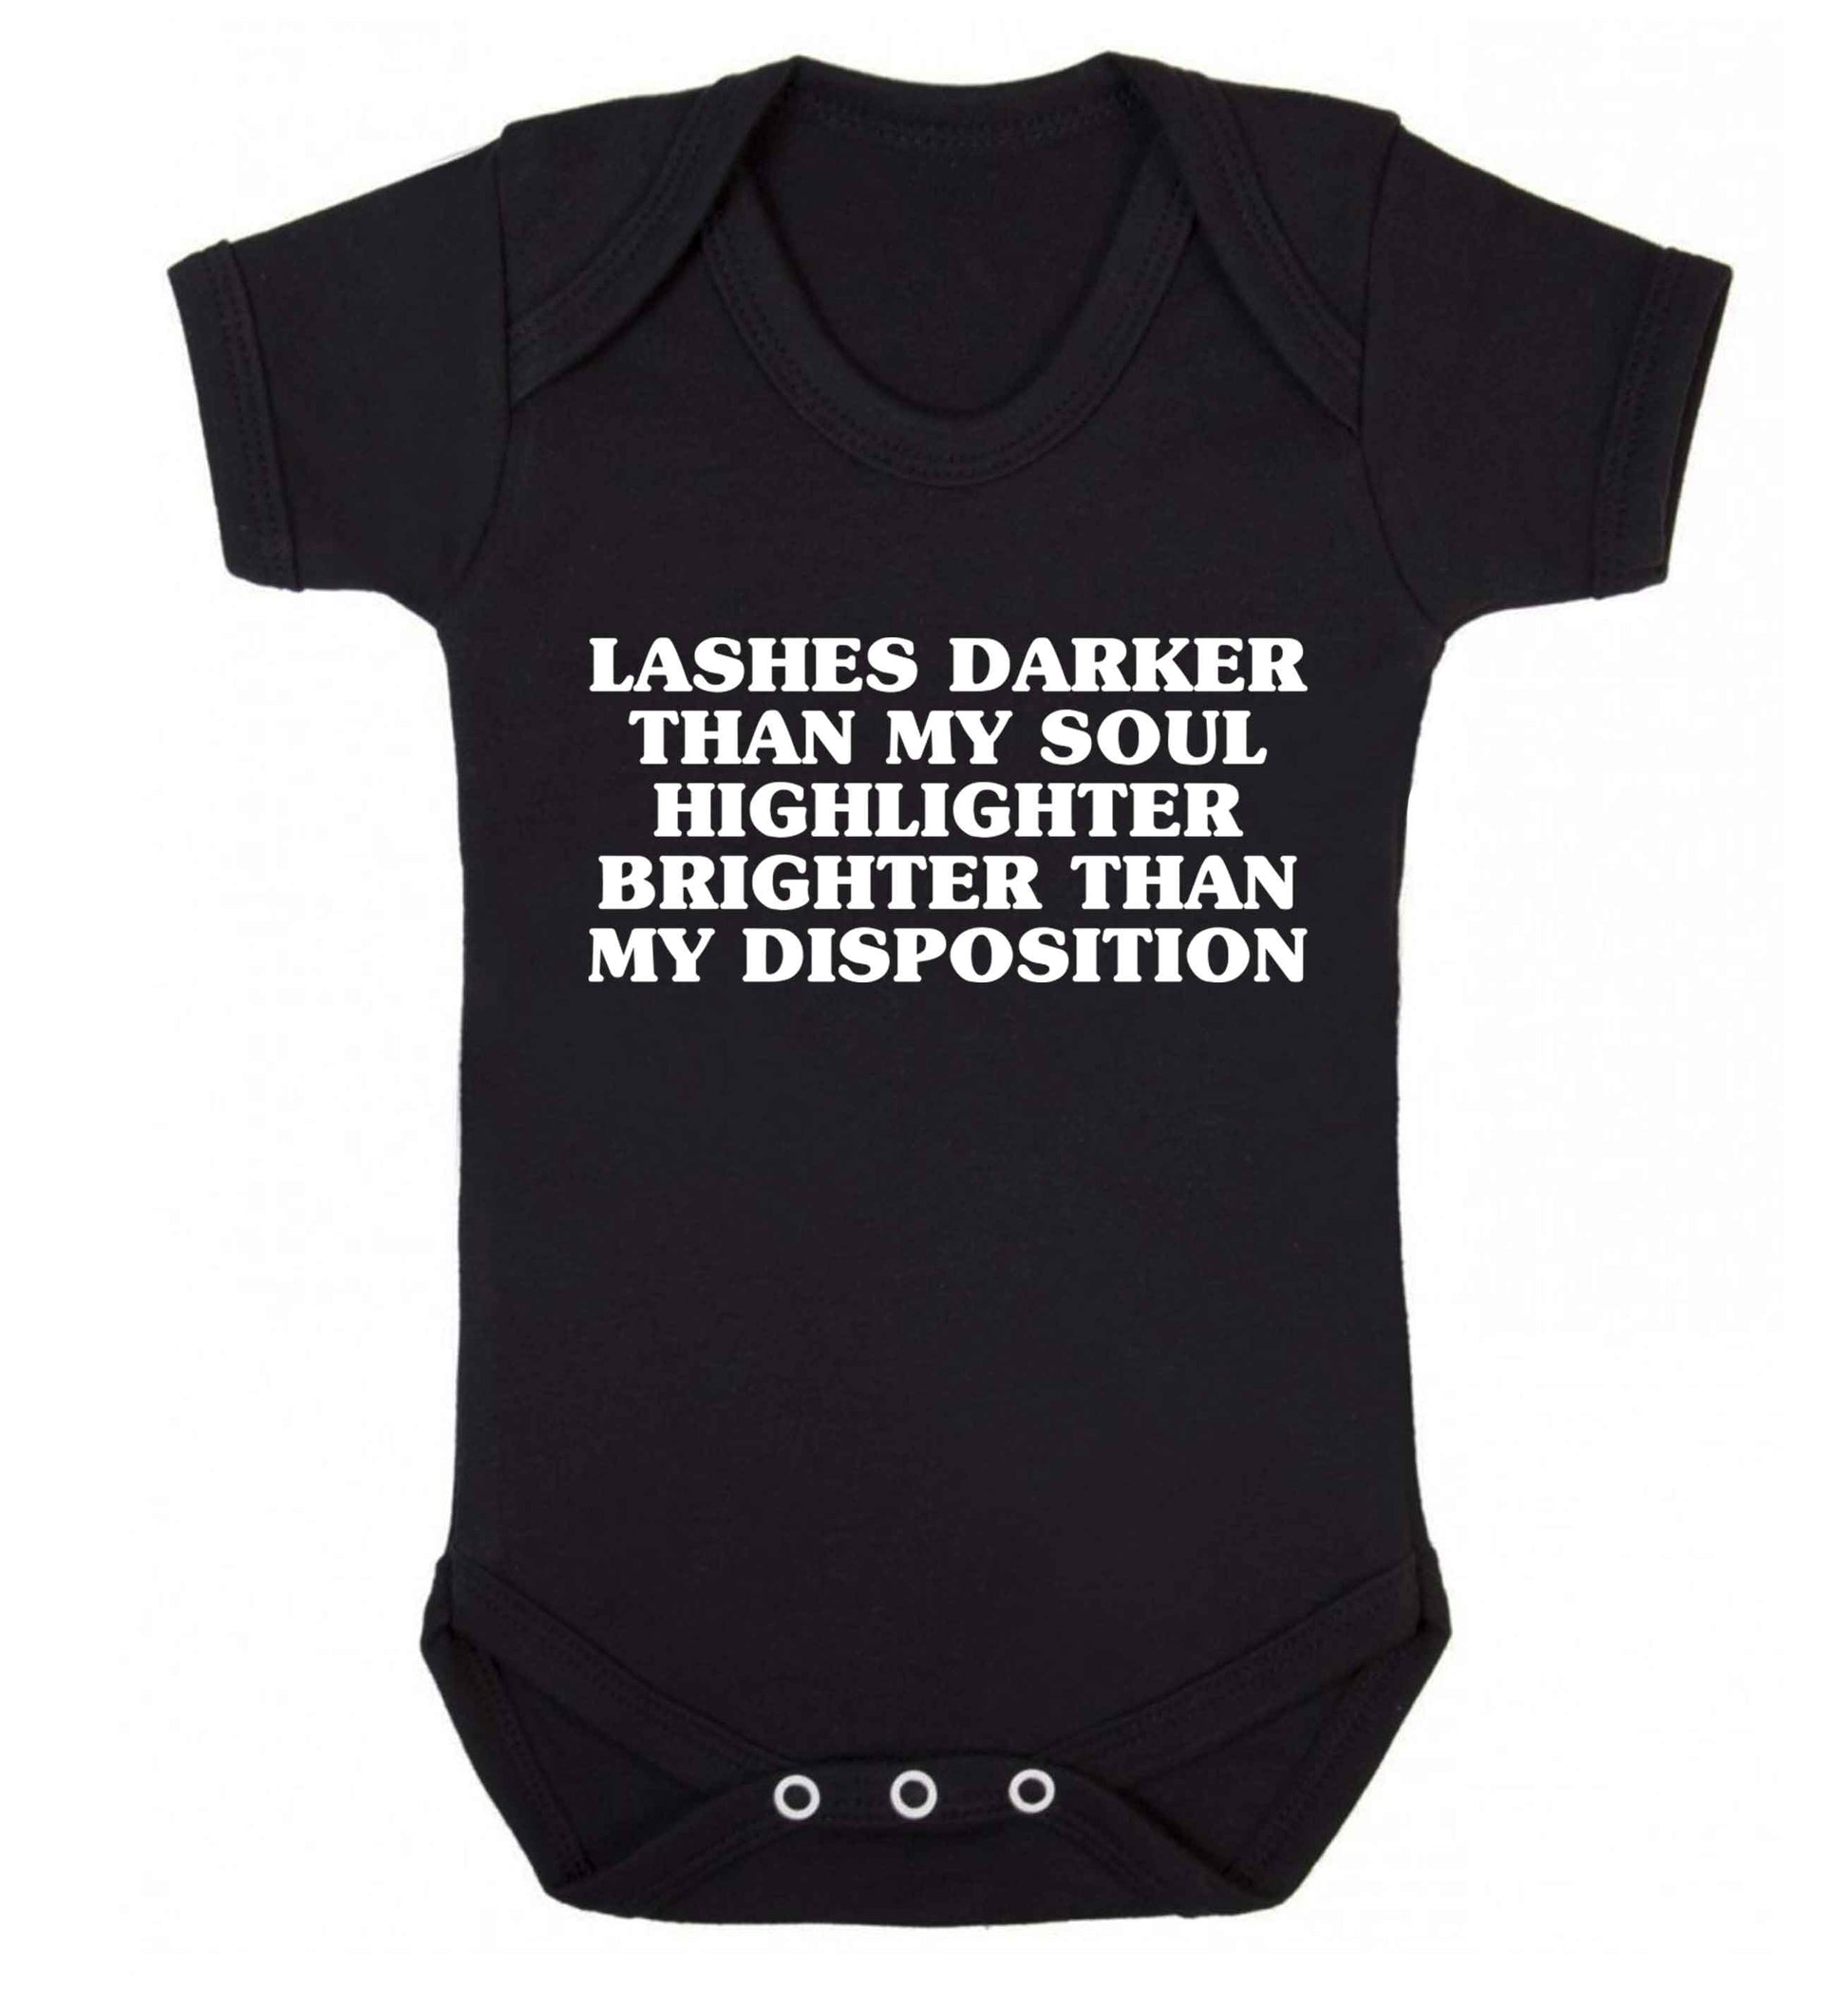 Lashes darker than my soul, highlighter brighter than my disposition Baby Vest black 18-24 months